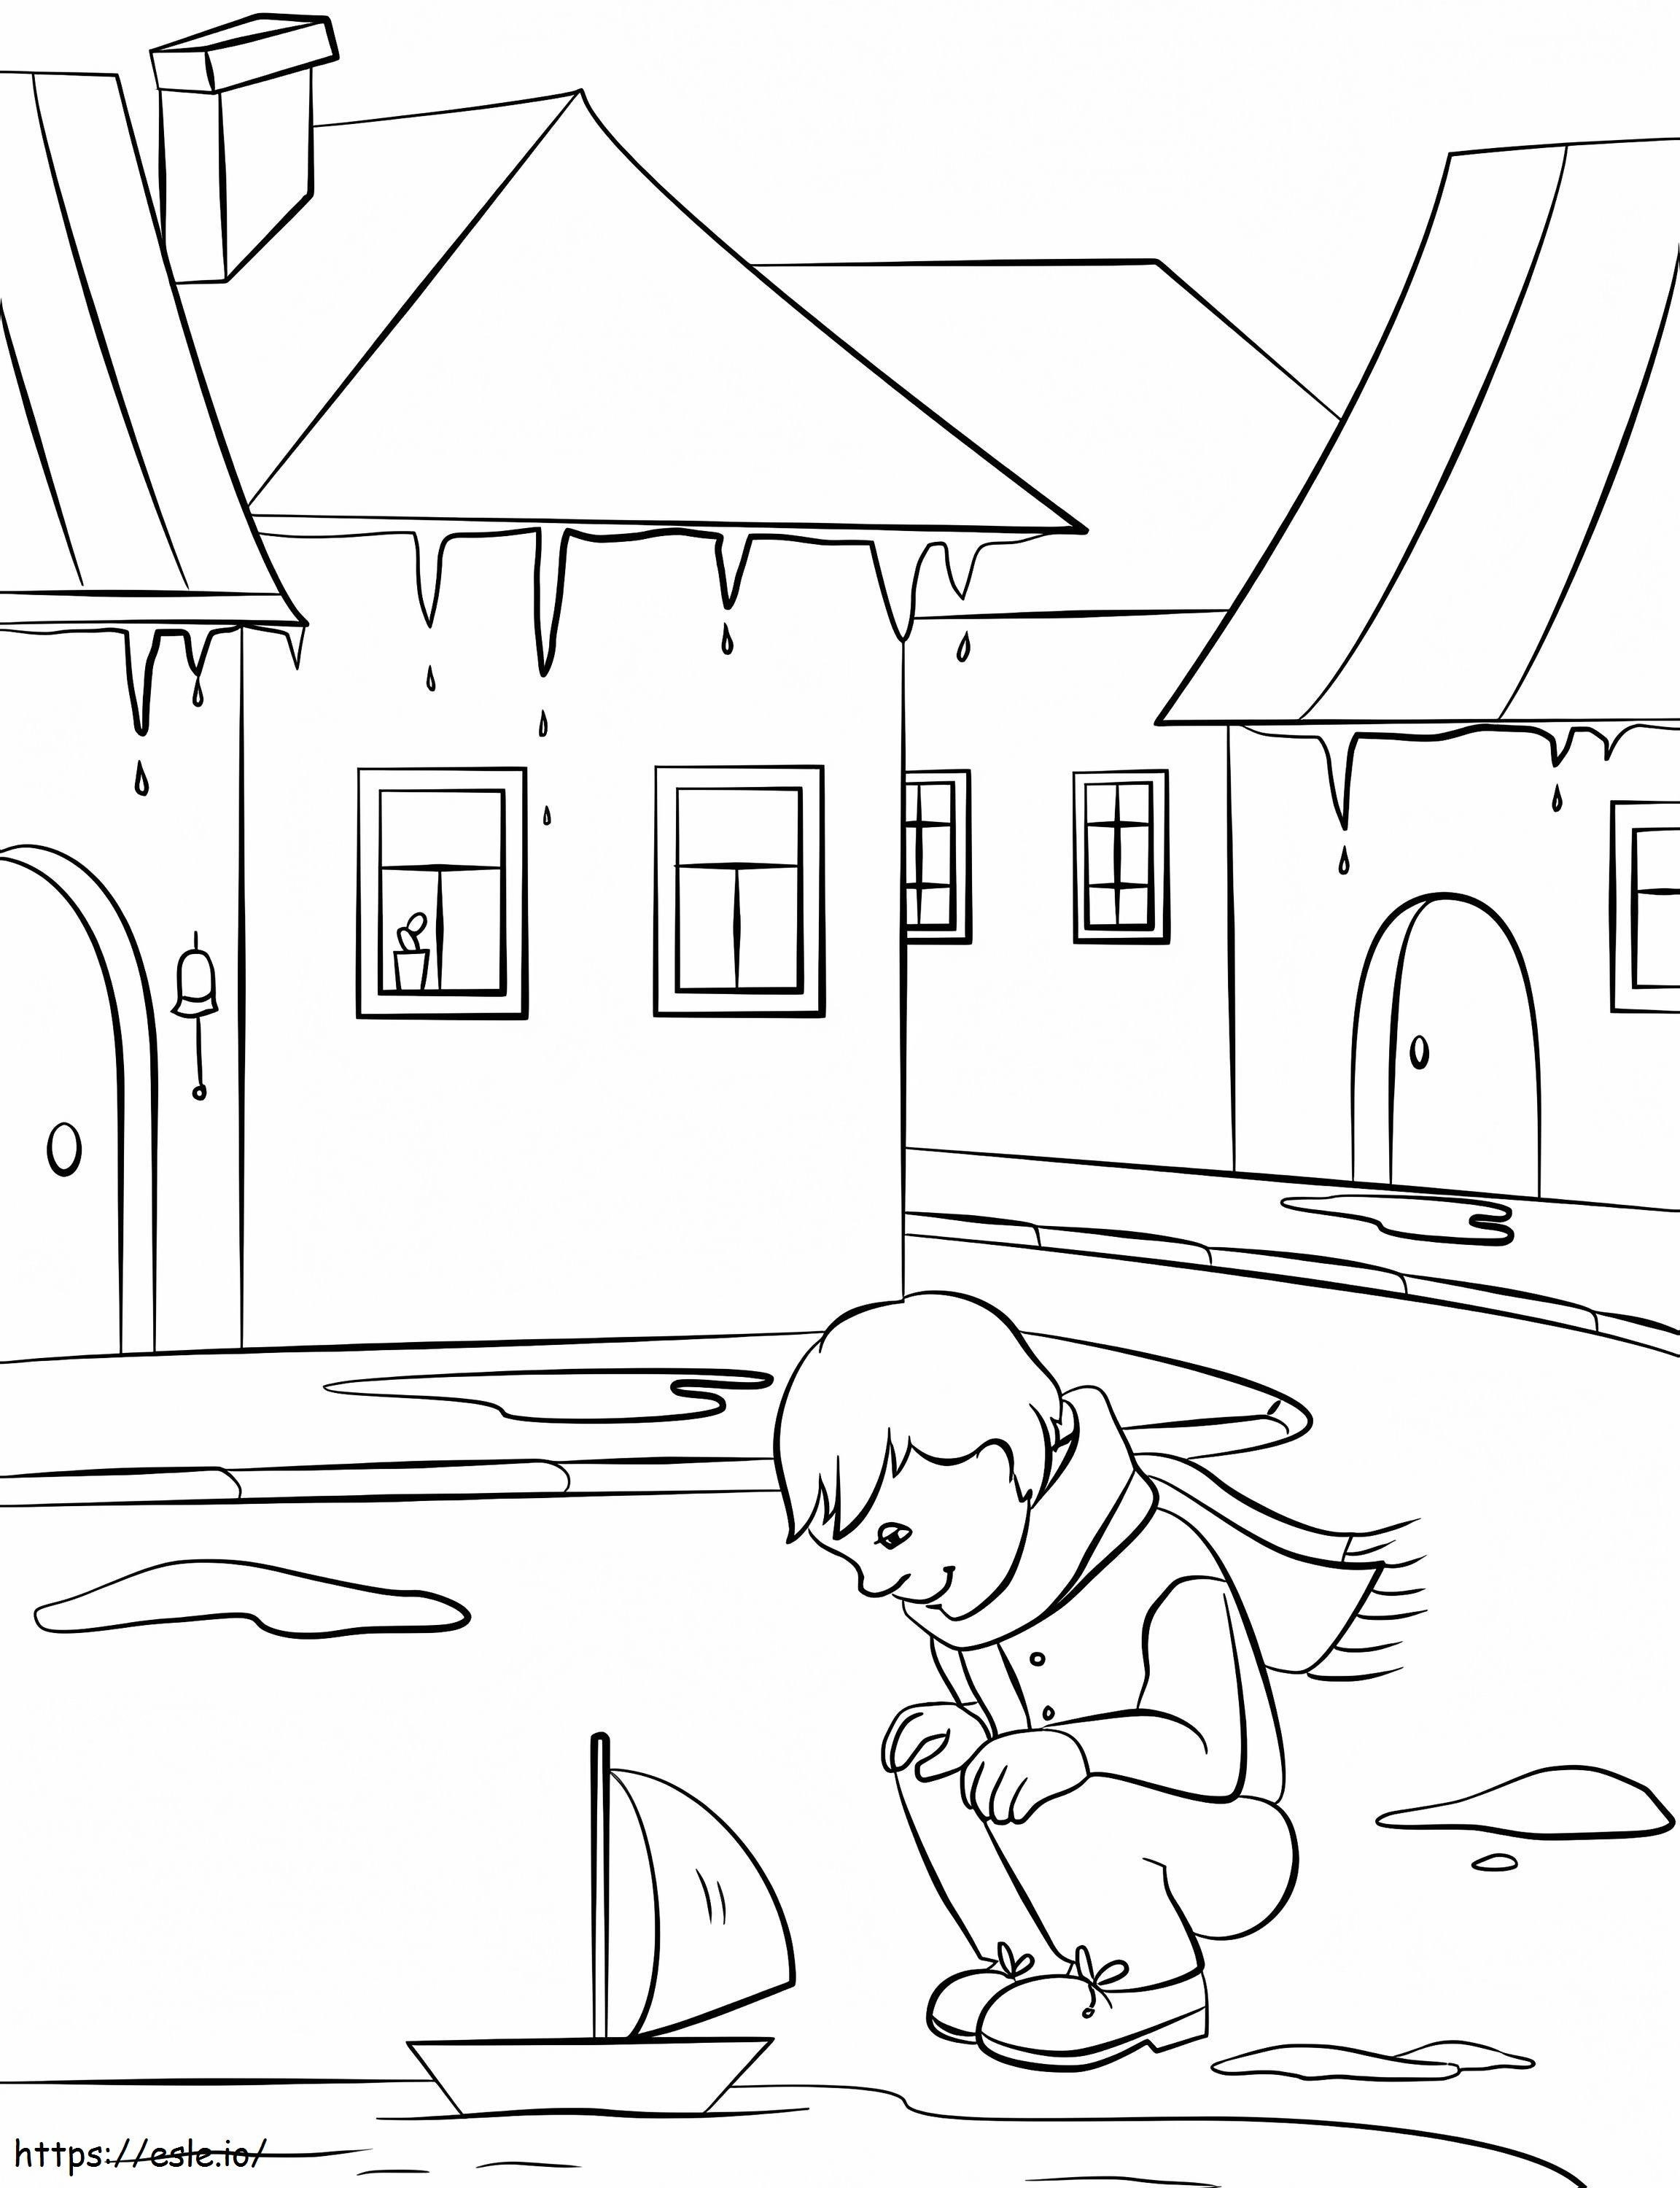 Spring In A Small Town coloring page